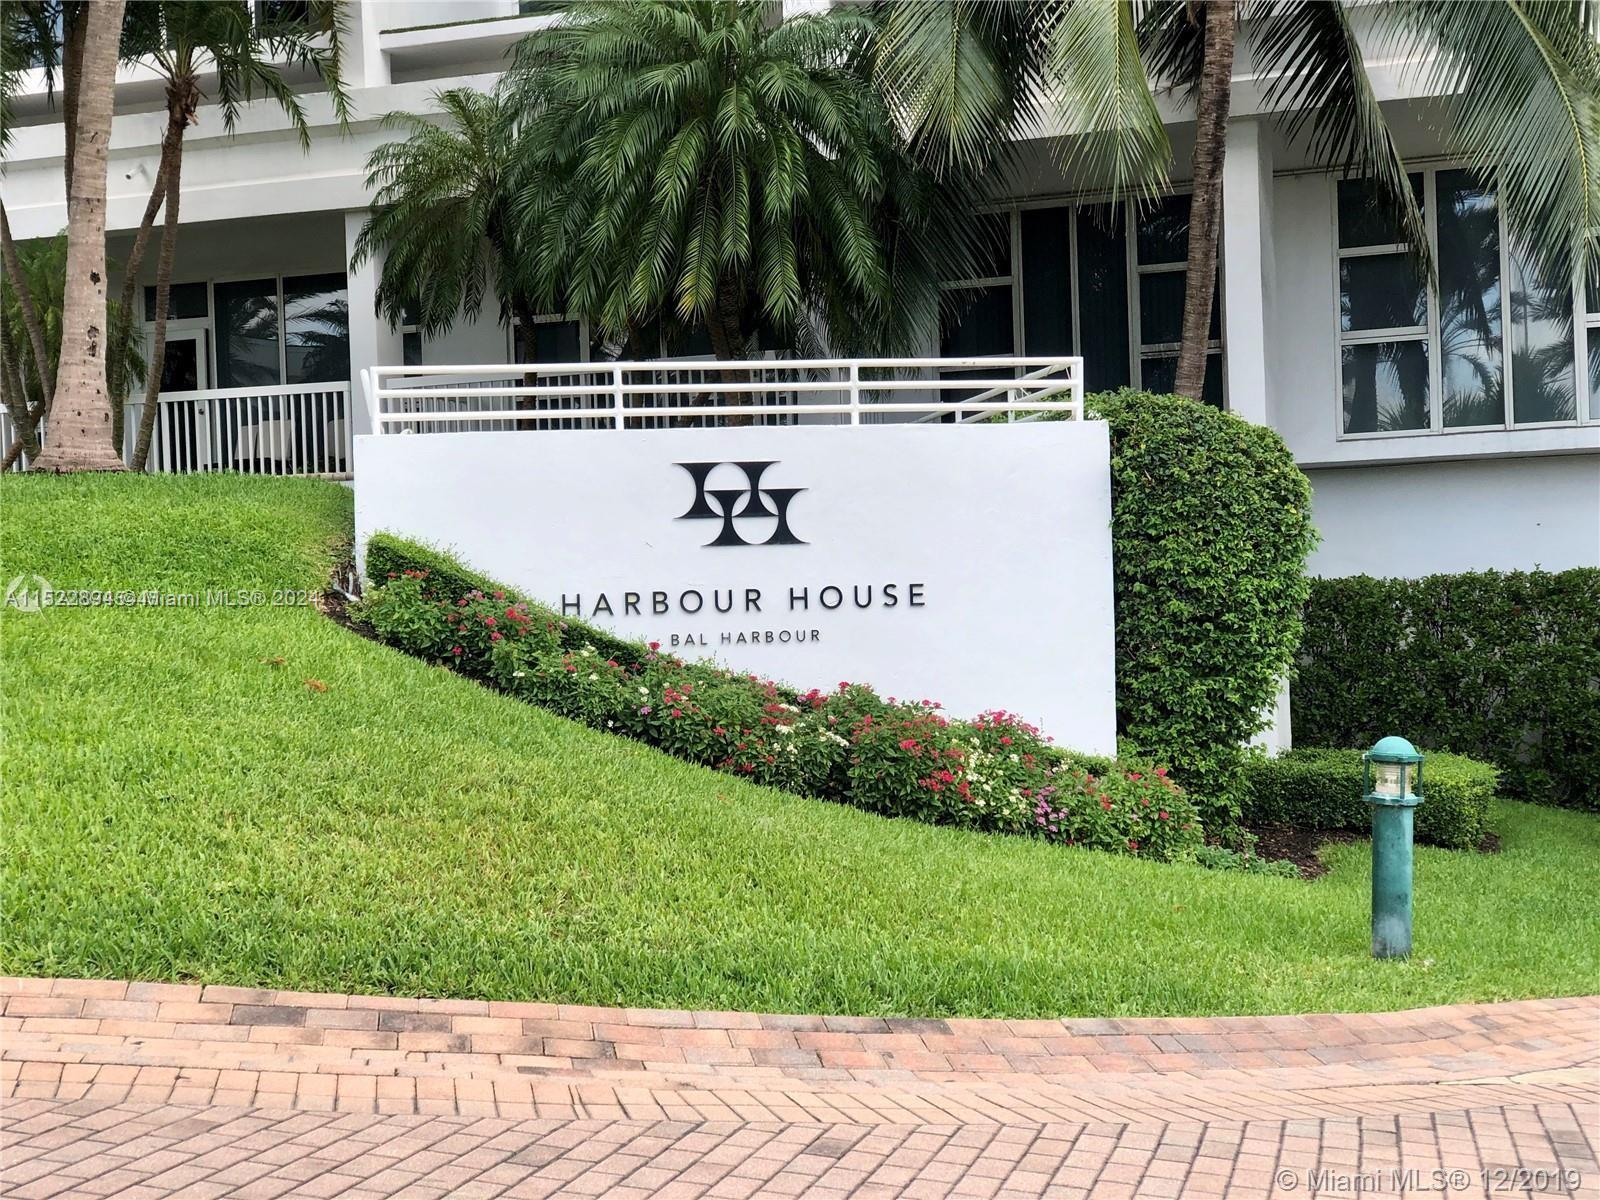 Beautiful 2 bedrooms and 2 bathrooms located in Harbour House. Great furnished 2/2 apt in prime and renovated building on the beach. Resort style amenities include: pool, gym, beach service, valet, security, etc. Couple minutes from Bal Harbour Mall. Ready to move in February, 15.